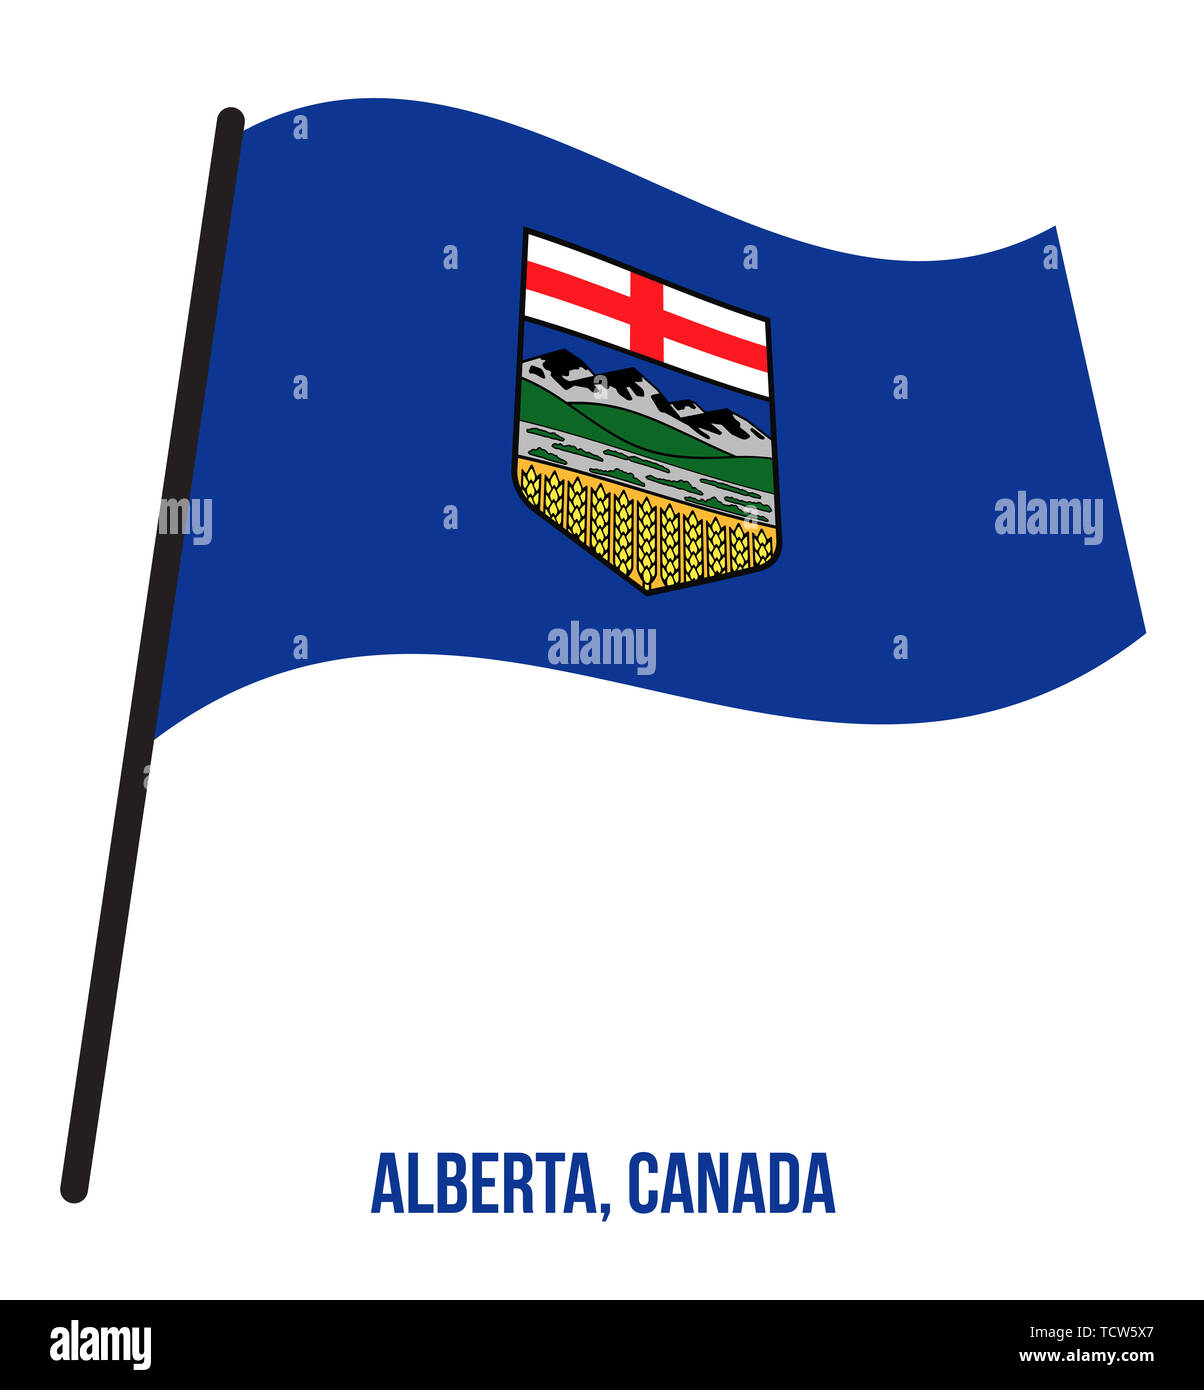 Alberta Flag Waving Vector Illustration on White Background. Provinces Flag of Canada. Correct Size, Proportion and Colors. Stock Photo